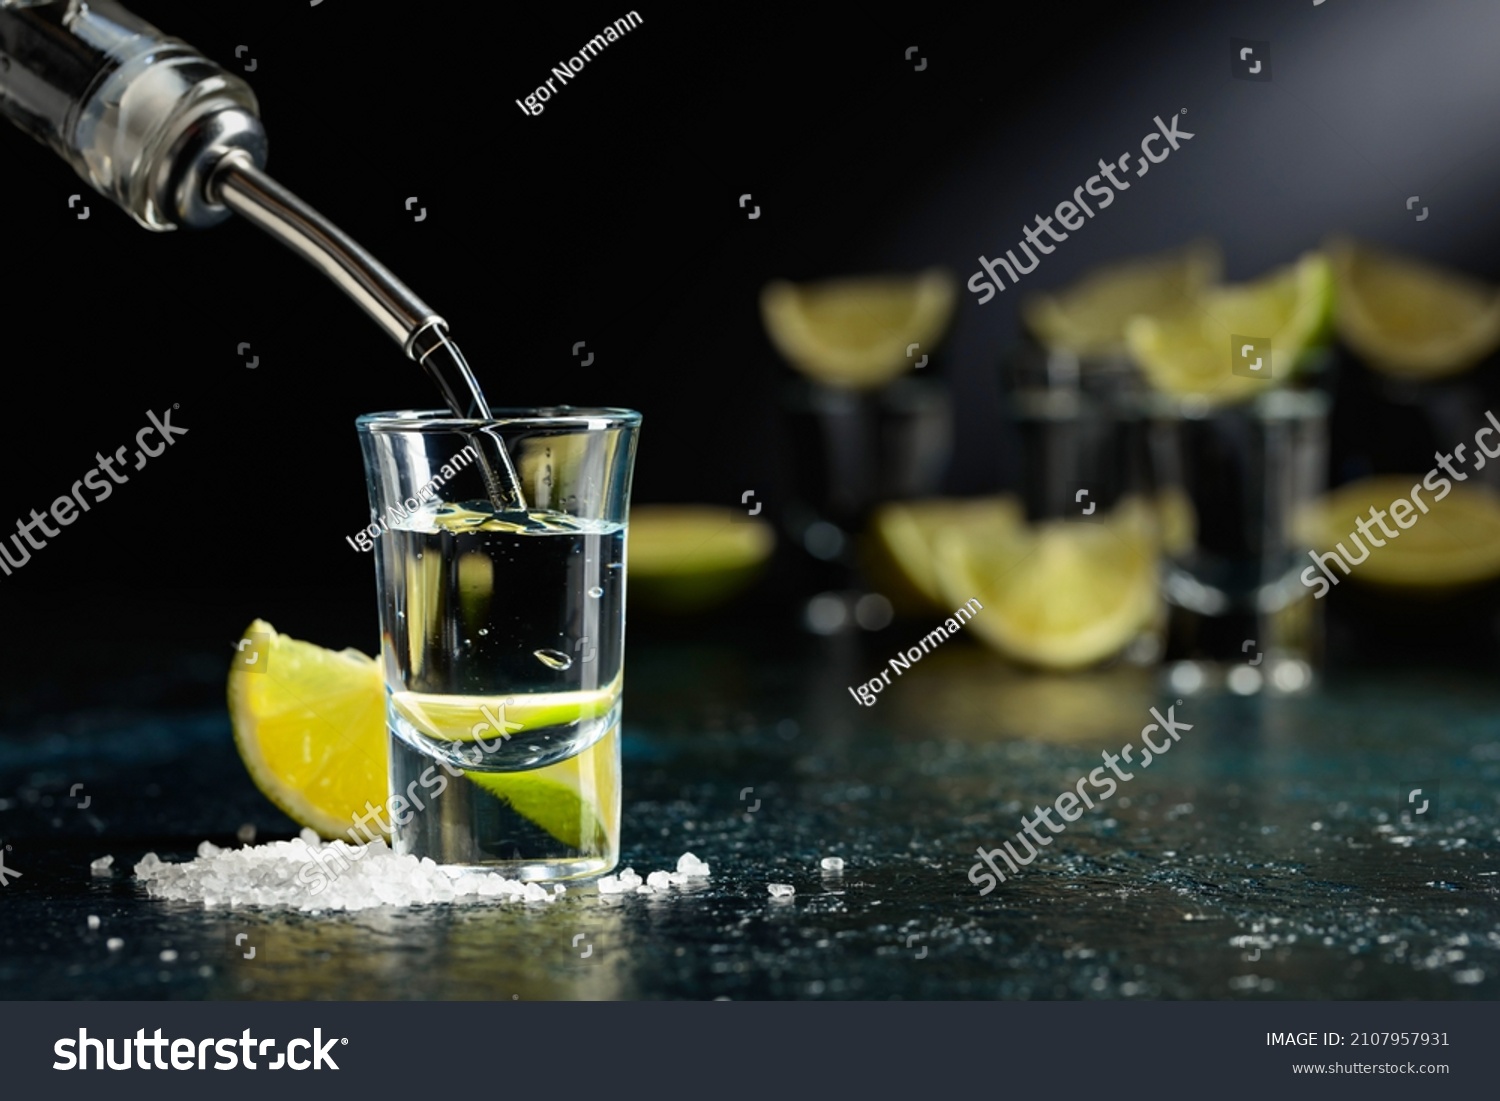 Tequila is poured into a glass. Tequila shots with lime slices and sea salt on a dark blue table. #2107957931